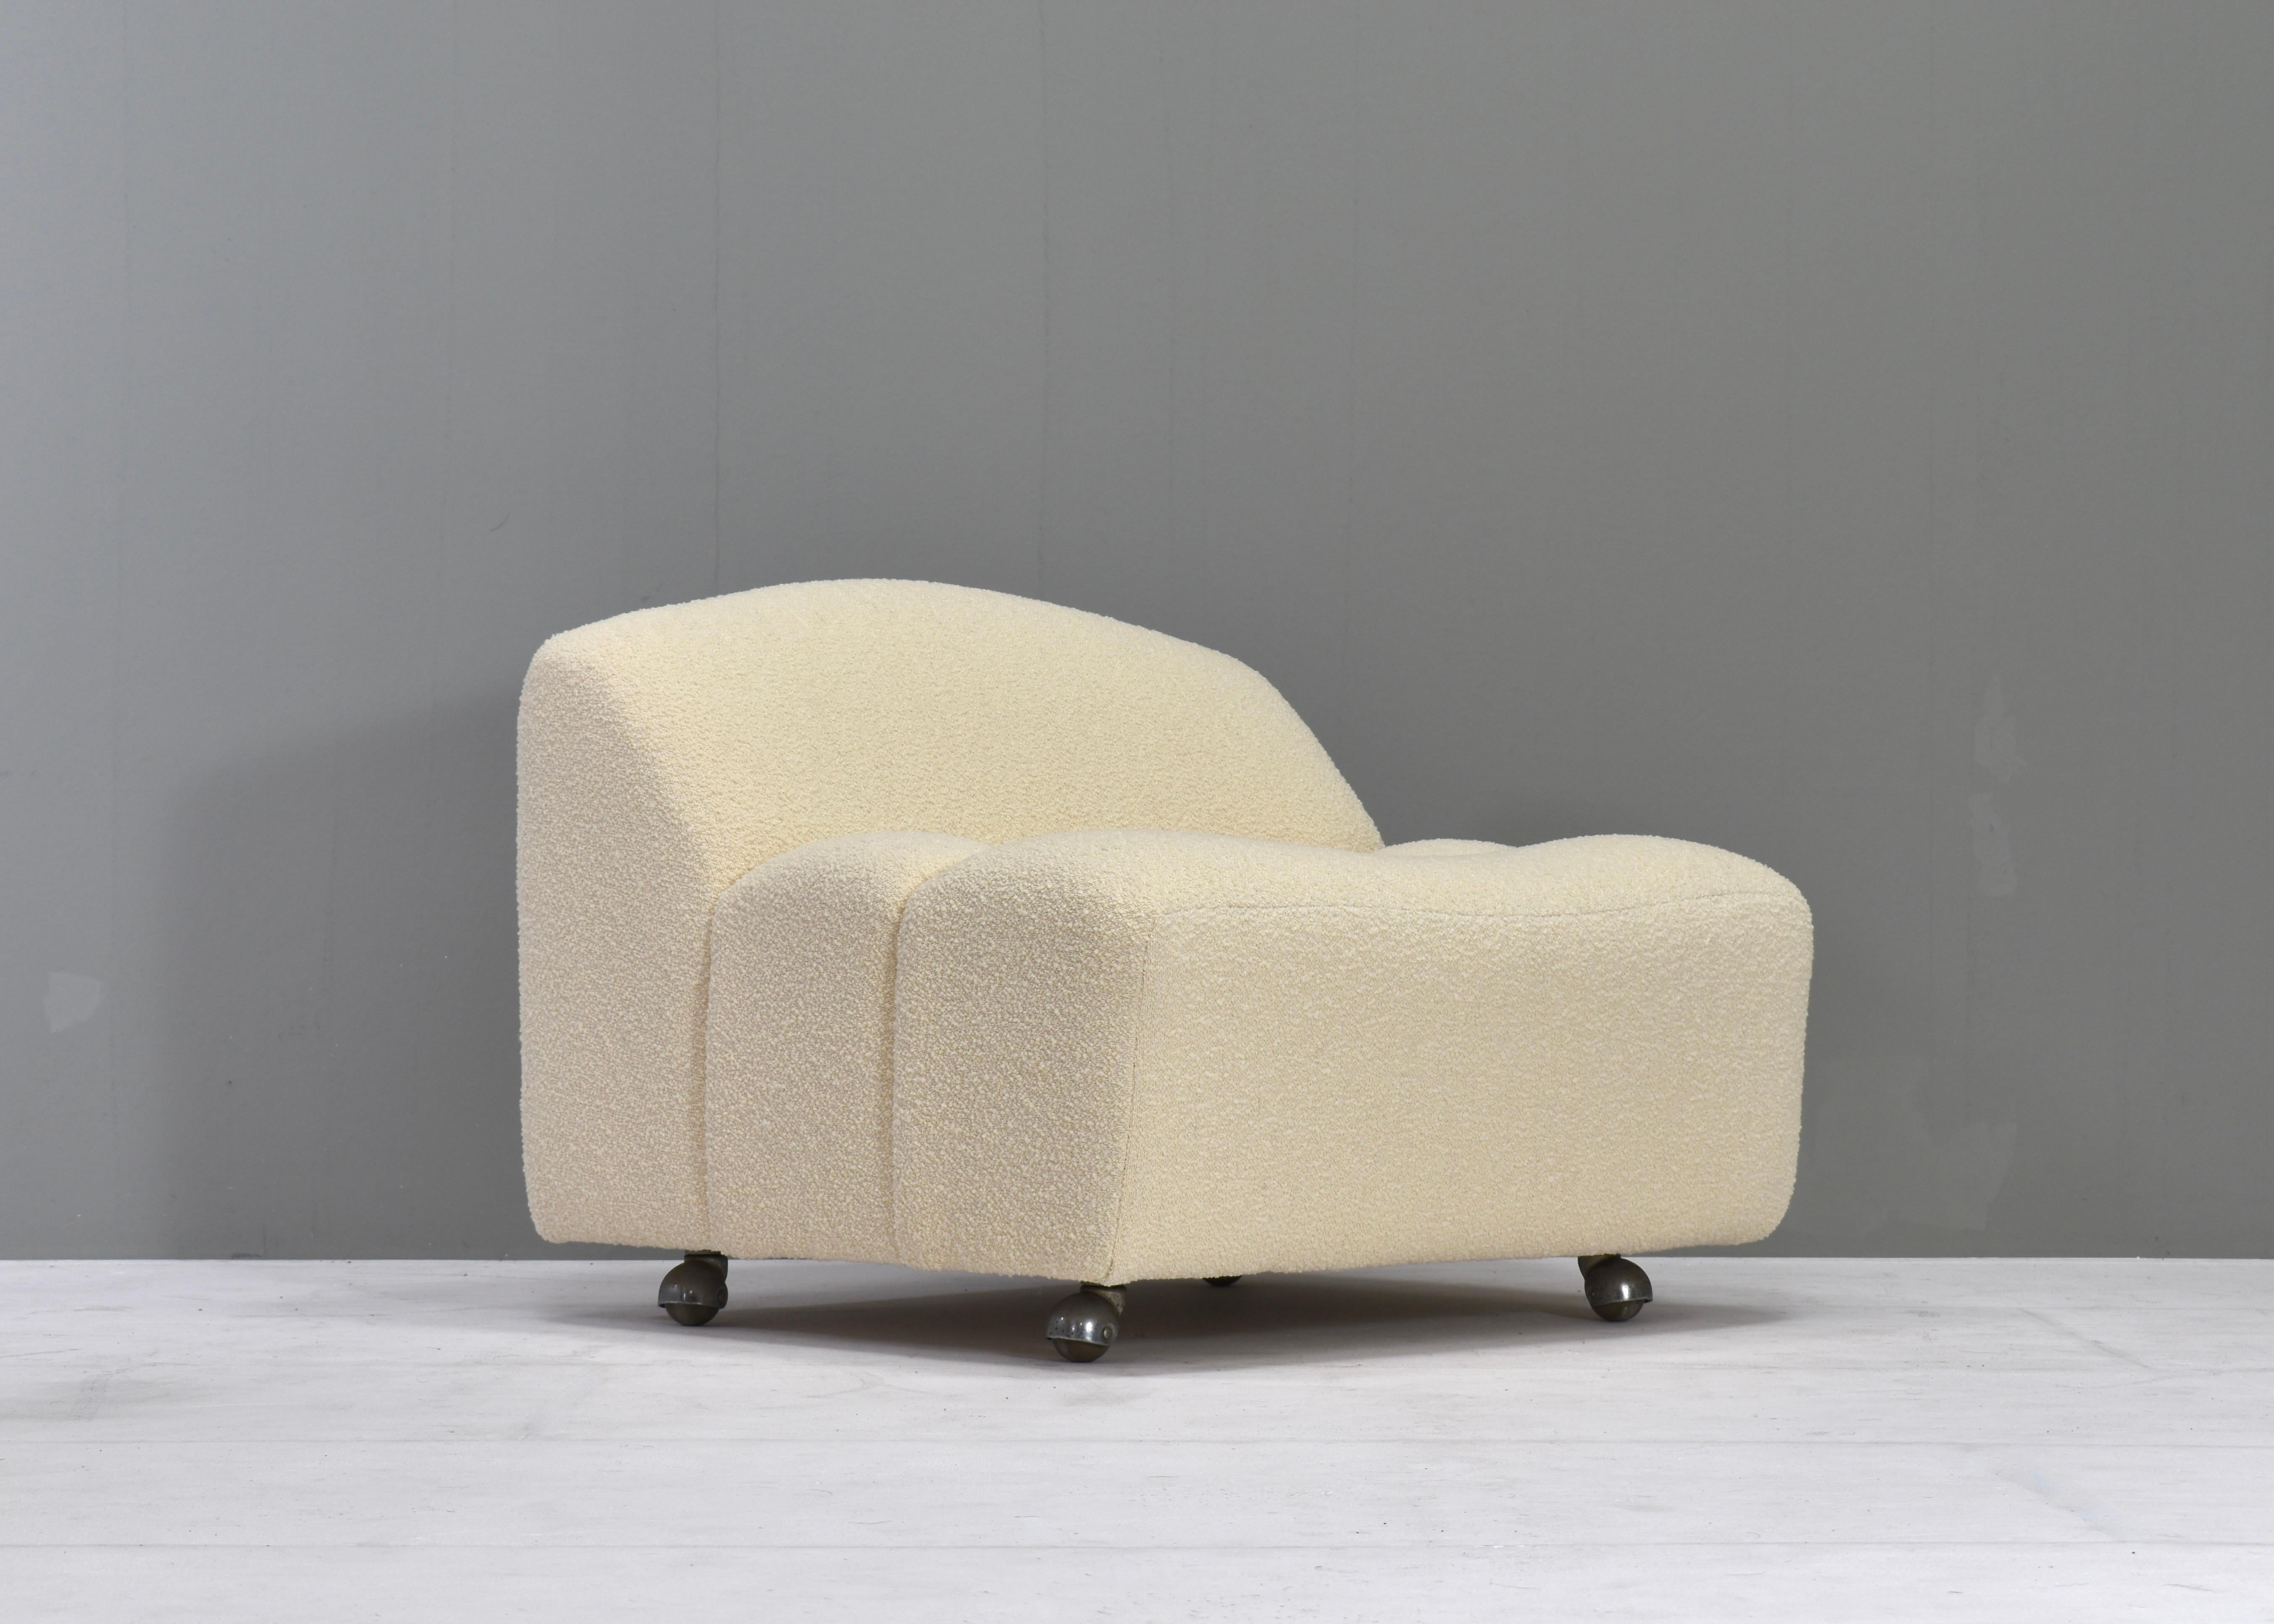 Rare ABCD F260 chair by Pierre Paulin for Artifort – Netherlands, 1968. 
It is re-upholstered in a beautiful wool/cotton fabric from Paris, France.
The chair is very comfortable and ergonomic to sit in.
The items still have the original wheels